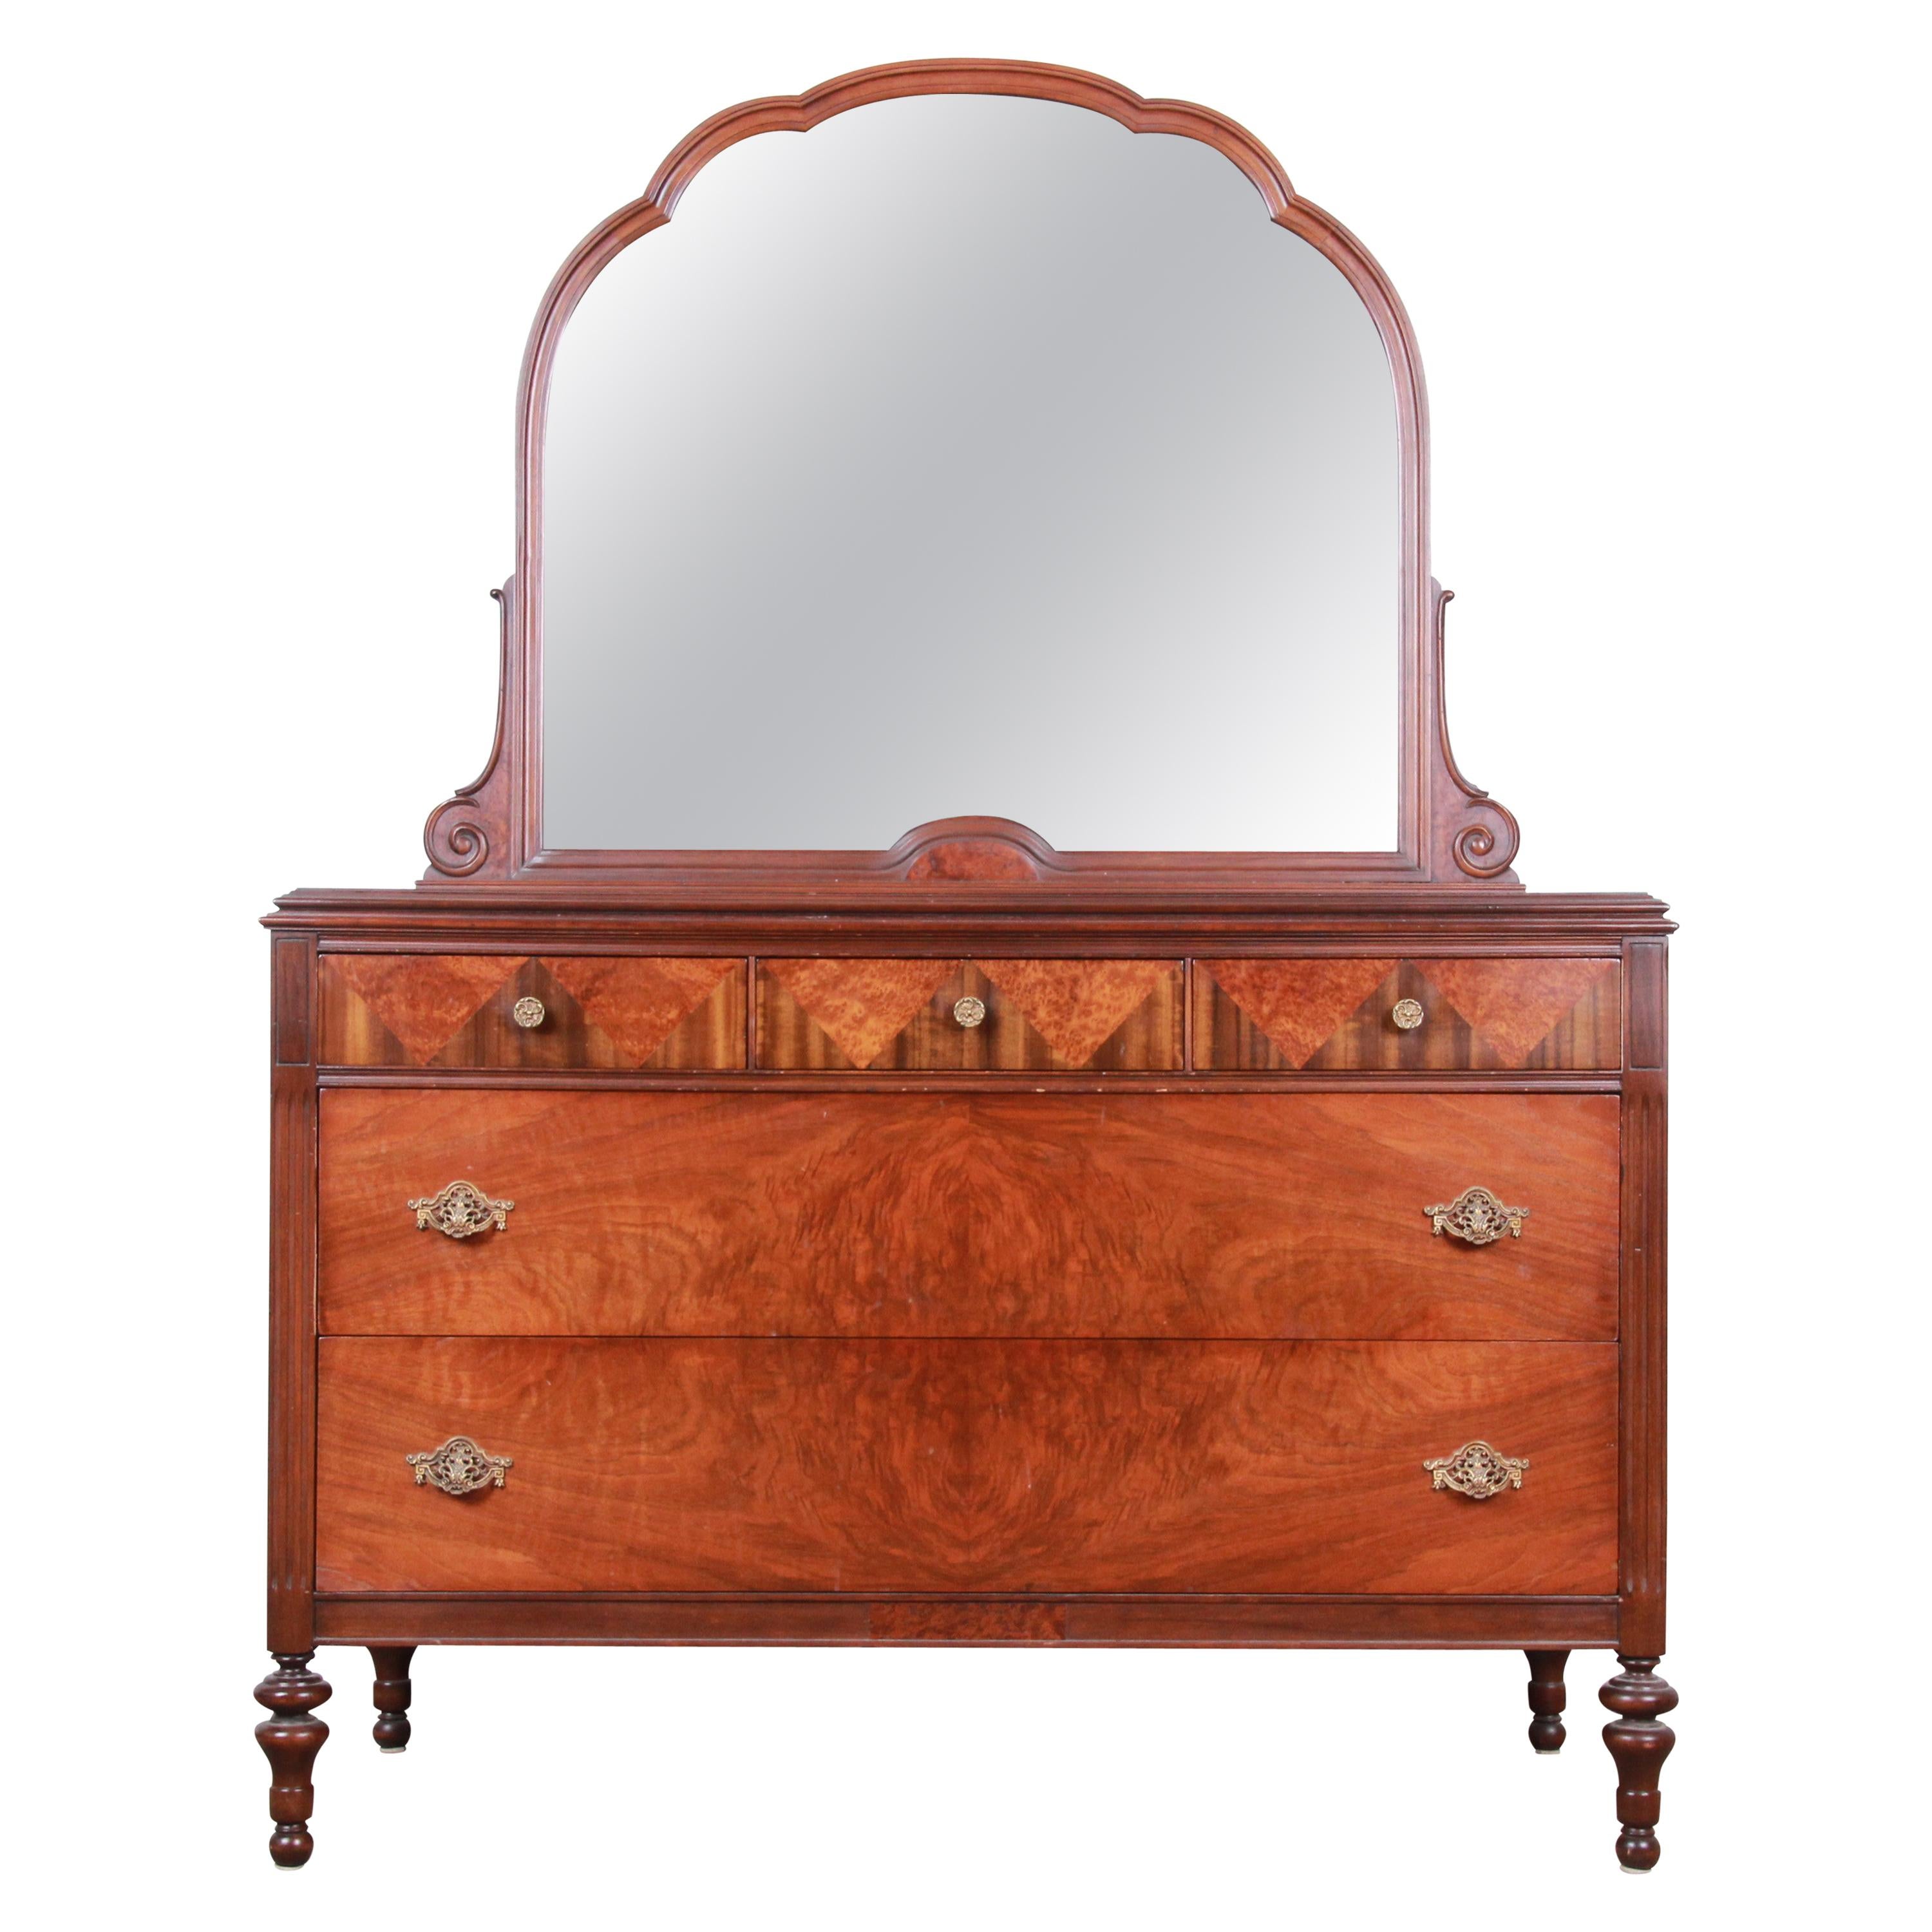 Antique Burled Walnut Dresser with Mirror Attributed to Baker Furniture, 1920s